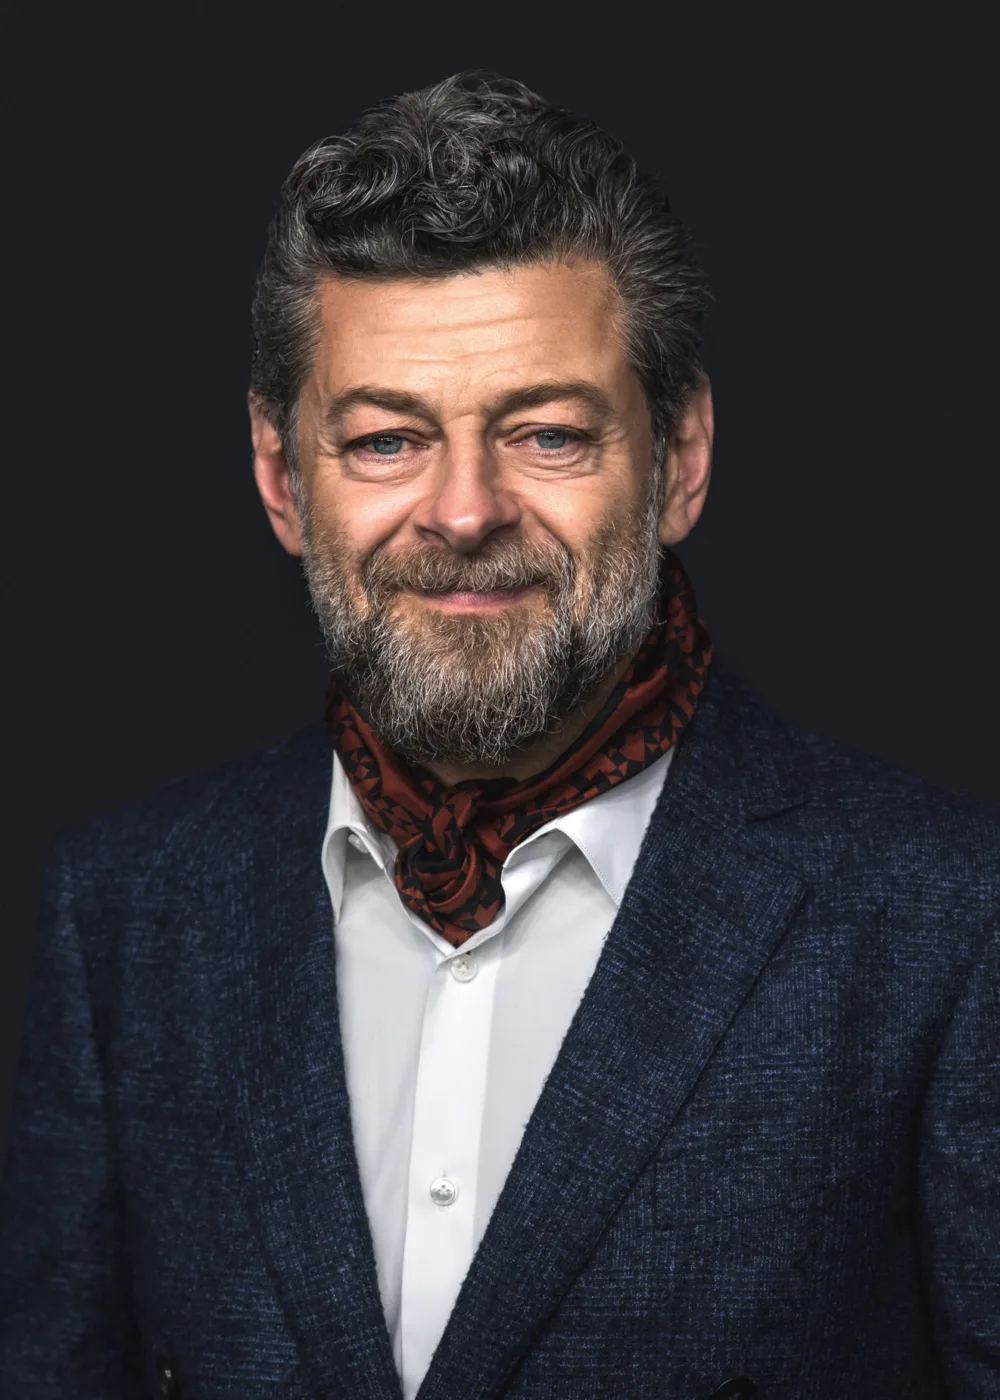 Jonathan Serkis is an English actor and filmmaker known for his groundbreaking motion capture performances in films such as The Lord of the Rings and The Hobbit trilogies. Born on April 20, 1964, in Ruislip, Middlesex, Serkis began his career as a stage actor before transitioning to film and television. Serkis is best known for his pioneering work in motion capture, which involves wearing a special suit and using sensors to track his movements and expressions. This technology allows filmmakers to create realistic and fully realized computer-generated characters, with Serkis bringing to life iconic roles such as Gollum in The Lord of the Rings and Caesar in the Planet of the Apes series. In addition to his acting work, Serkis has also established himself as a successful filmmaker, directing films such as Breathe and Mowgli: Legend of the Jungle. He is also known for his philanthropy and activism, supporting organizations such as the Motion Picture and Television Fund and the Enough Food for Everyone IF campaign. With his talent, creativity, and dedication to using technology to push the boundaries of storytelling, Serkis has become one of the most innovative and respected actors and filmmakers of his generation, inspiring fans around the world with his performances and his advocacy work.